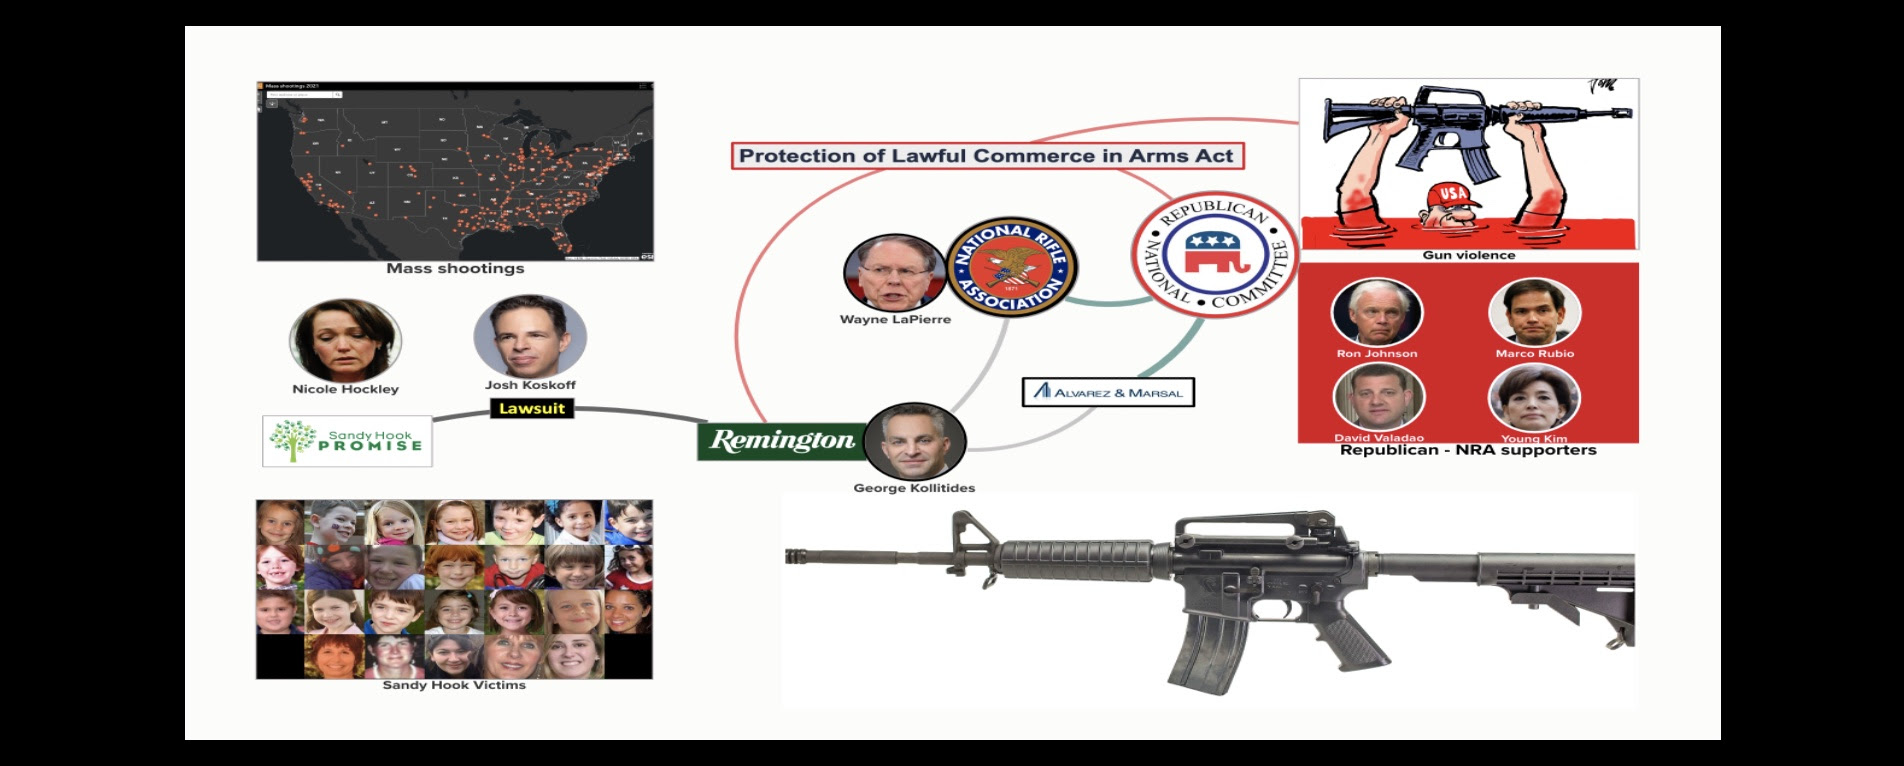 Sandy Hook settlement highlights the gun lobby money buying Republican obstruction to gun safety measures